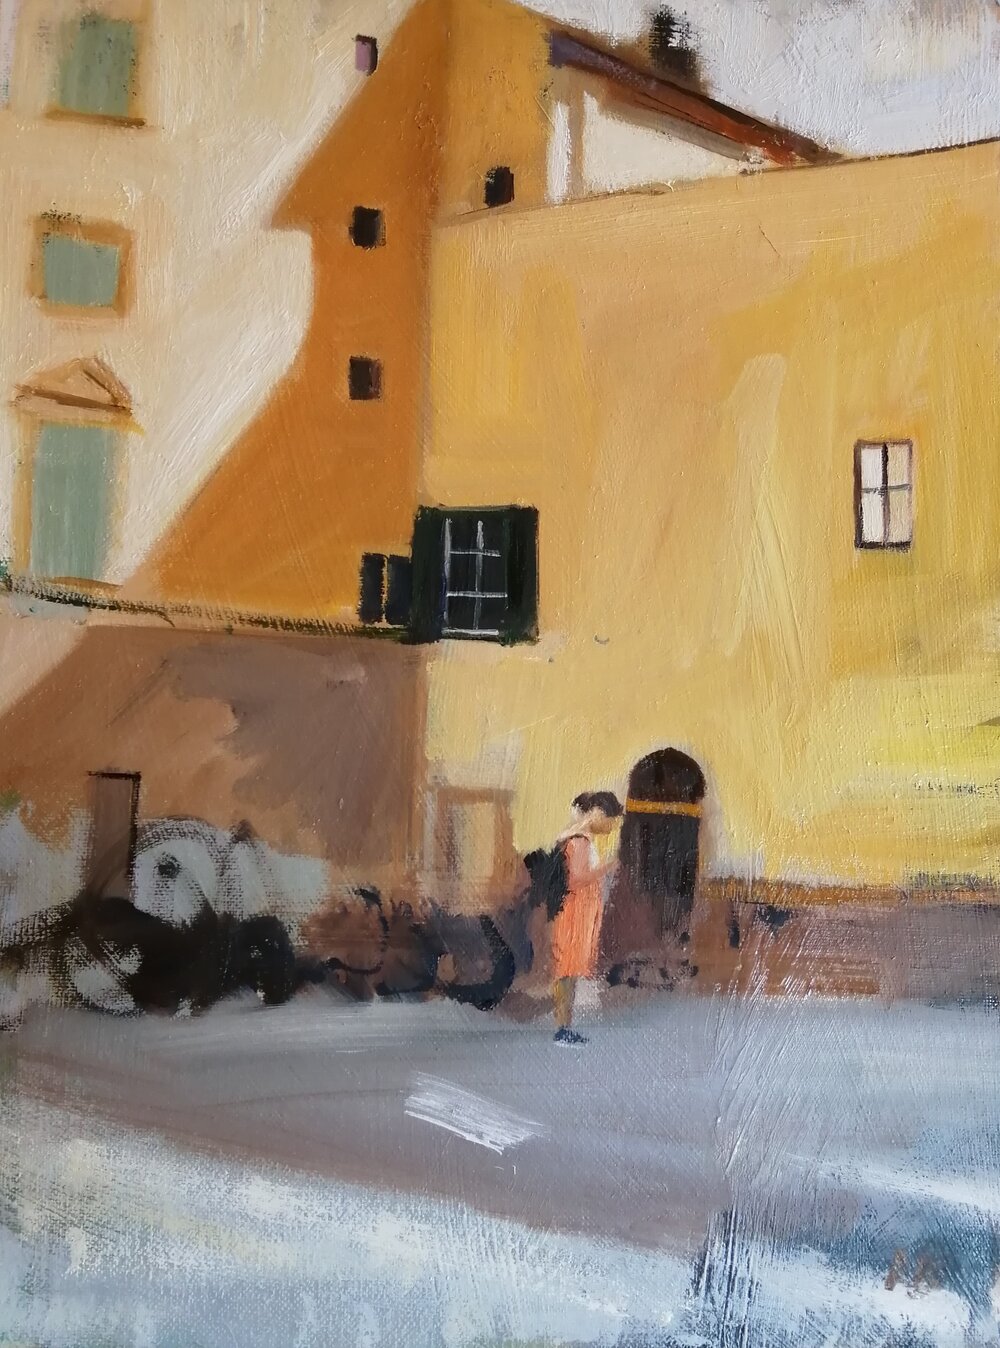  Lone tourist in Florence  Oil on board - 30x40 cms  SOLD  I loved the scale of the buildings towering over the lone tourist. I also took advantage of the geometric shapes created by the shadows. This painting was featured in House and Garden as part